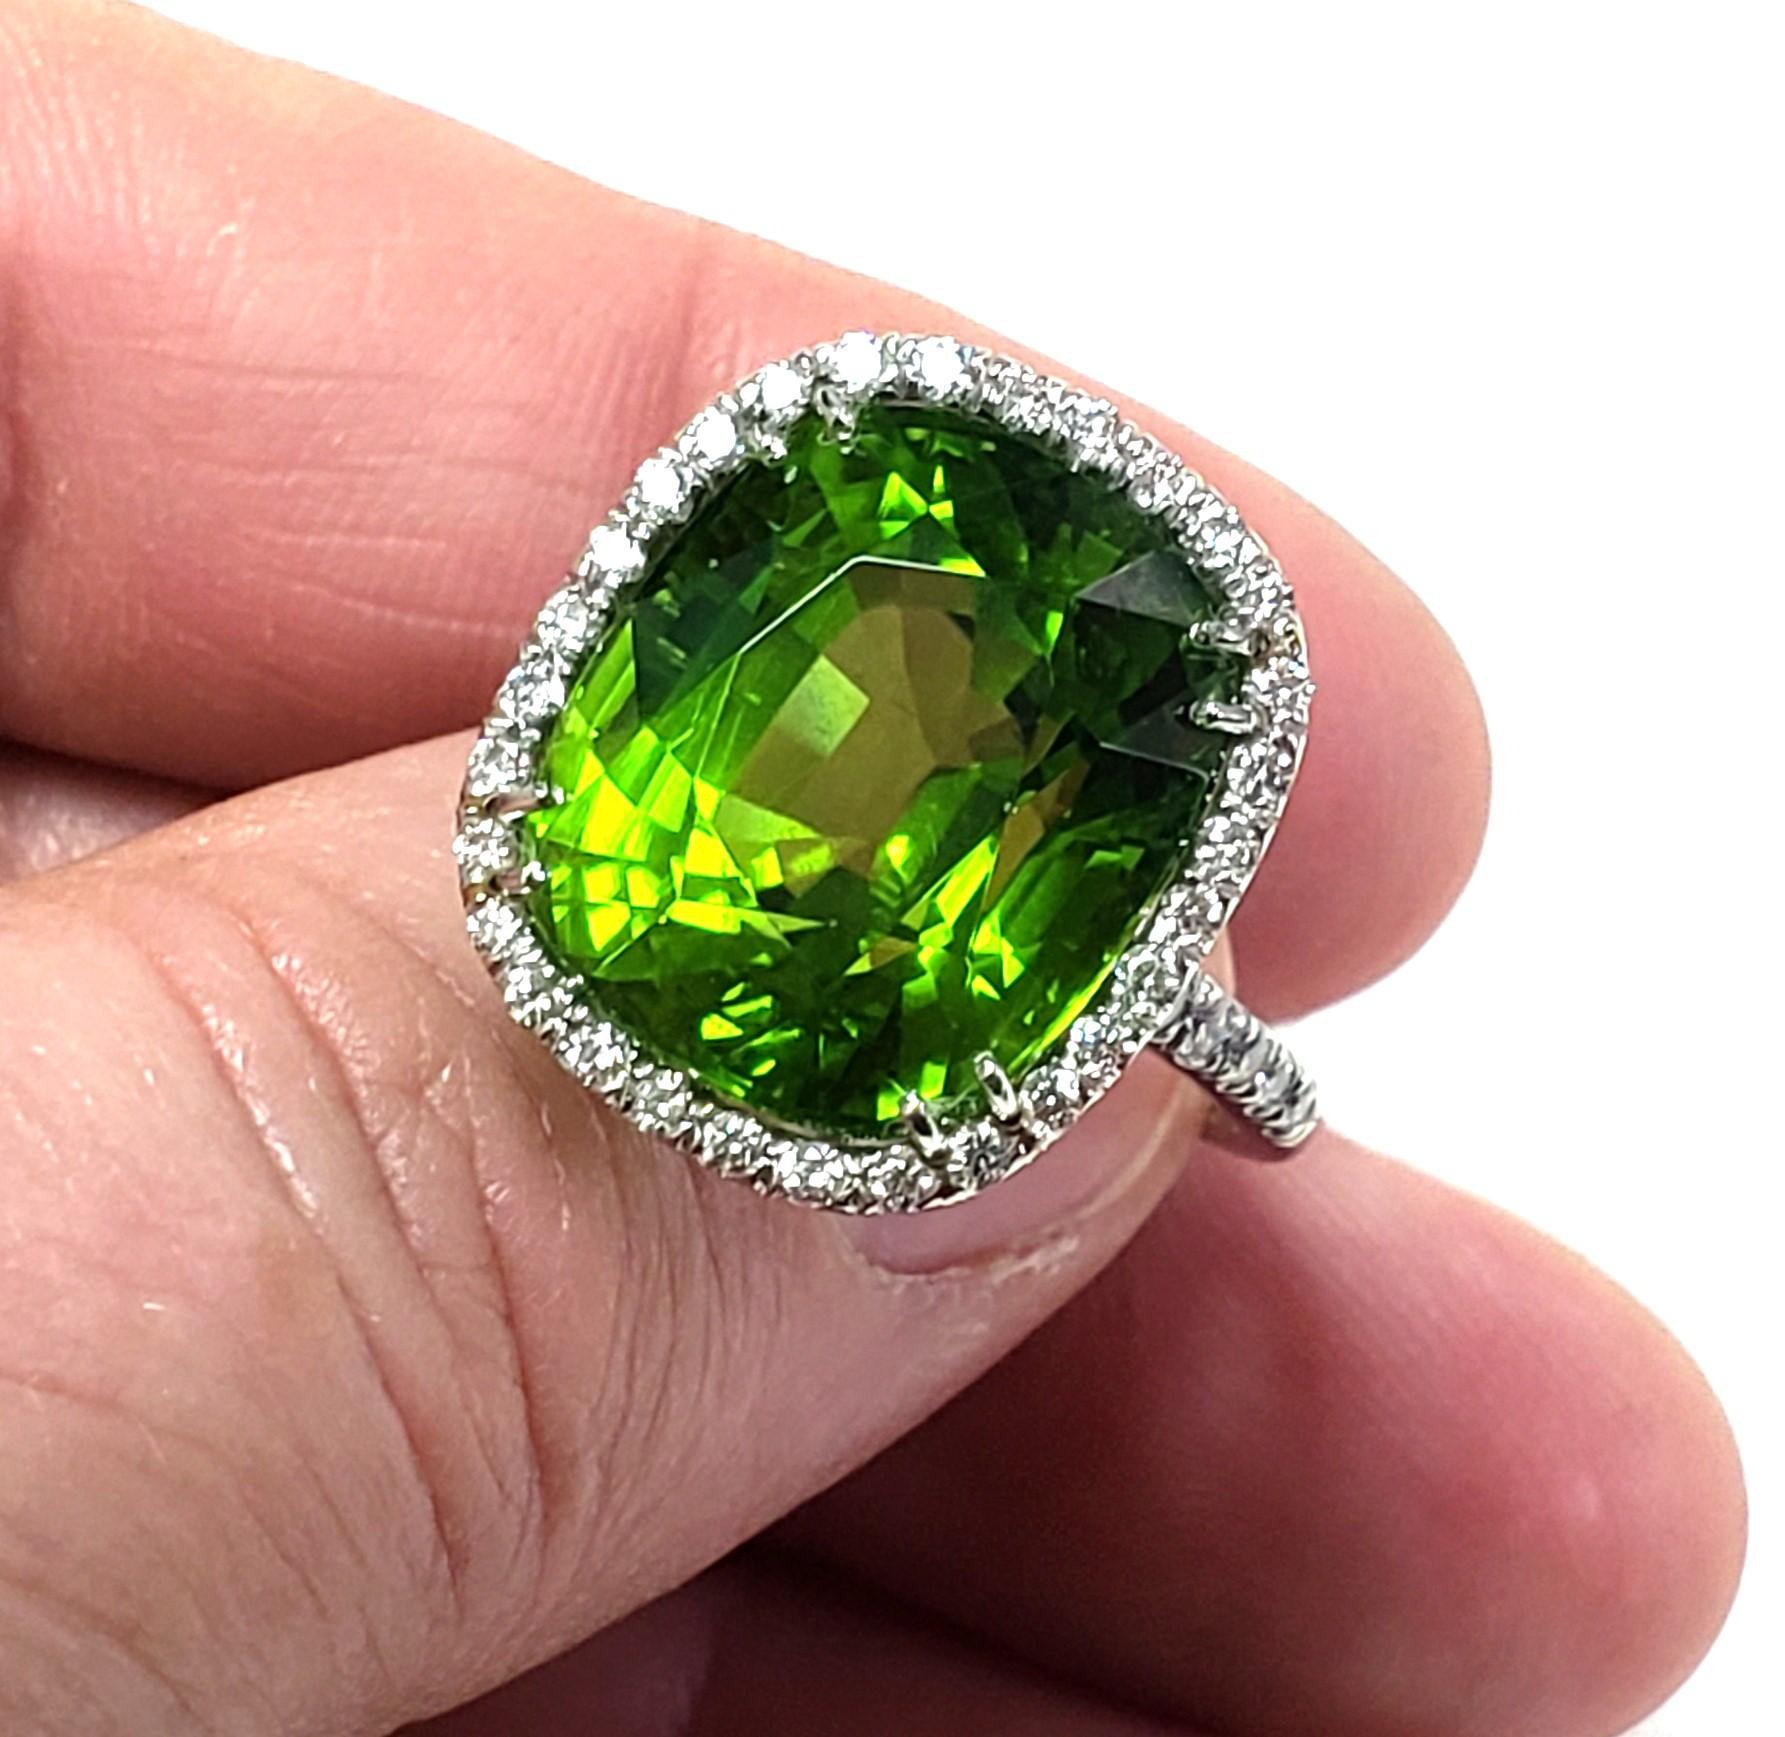 Ring set with One Cushion Mixed Cut Natural Peridot weighing 17.33CT (Peridot exhibits Yellowish green color - saturated beautiful color, transparent. No evidence of clarity enhancements. Please check AGL Gemstone report picture for the details).